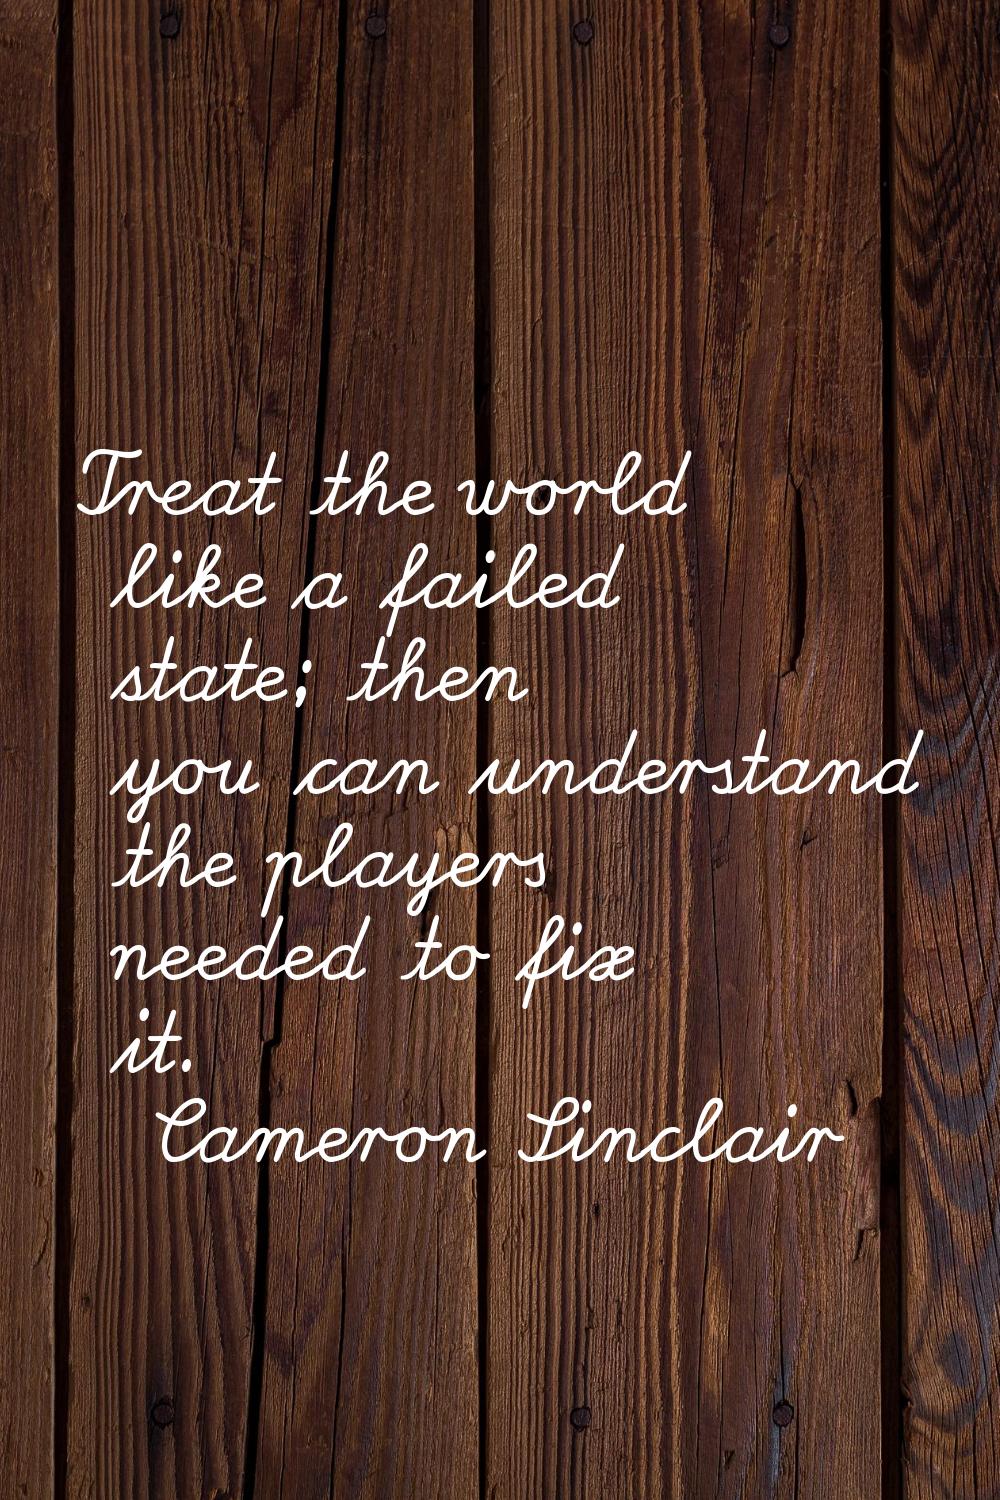 Treat the world like a failed state; then you can understand the players needed to fix it.